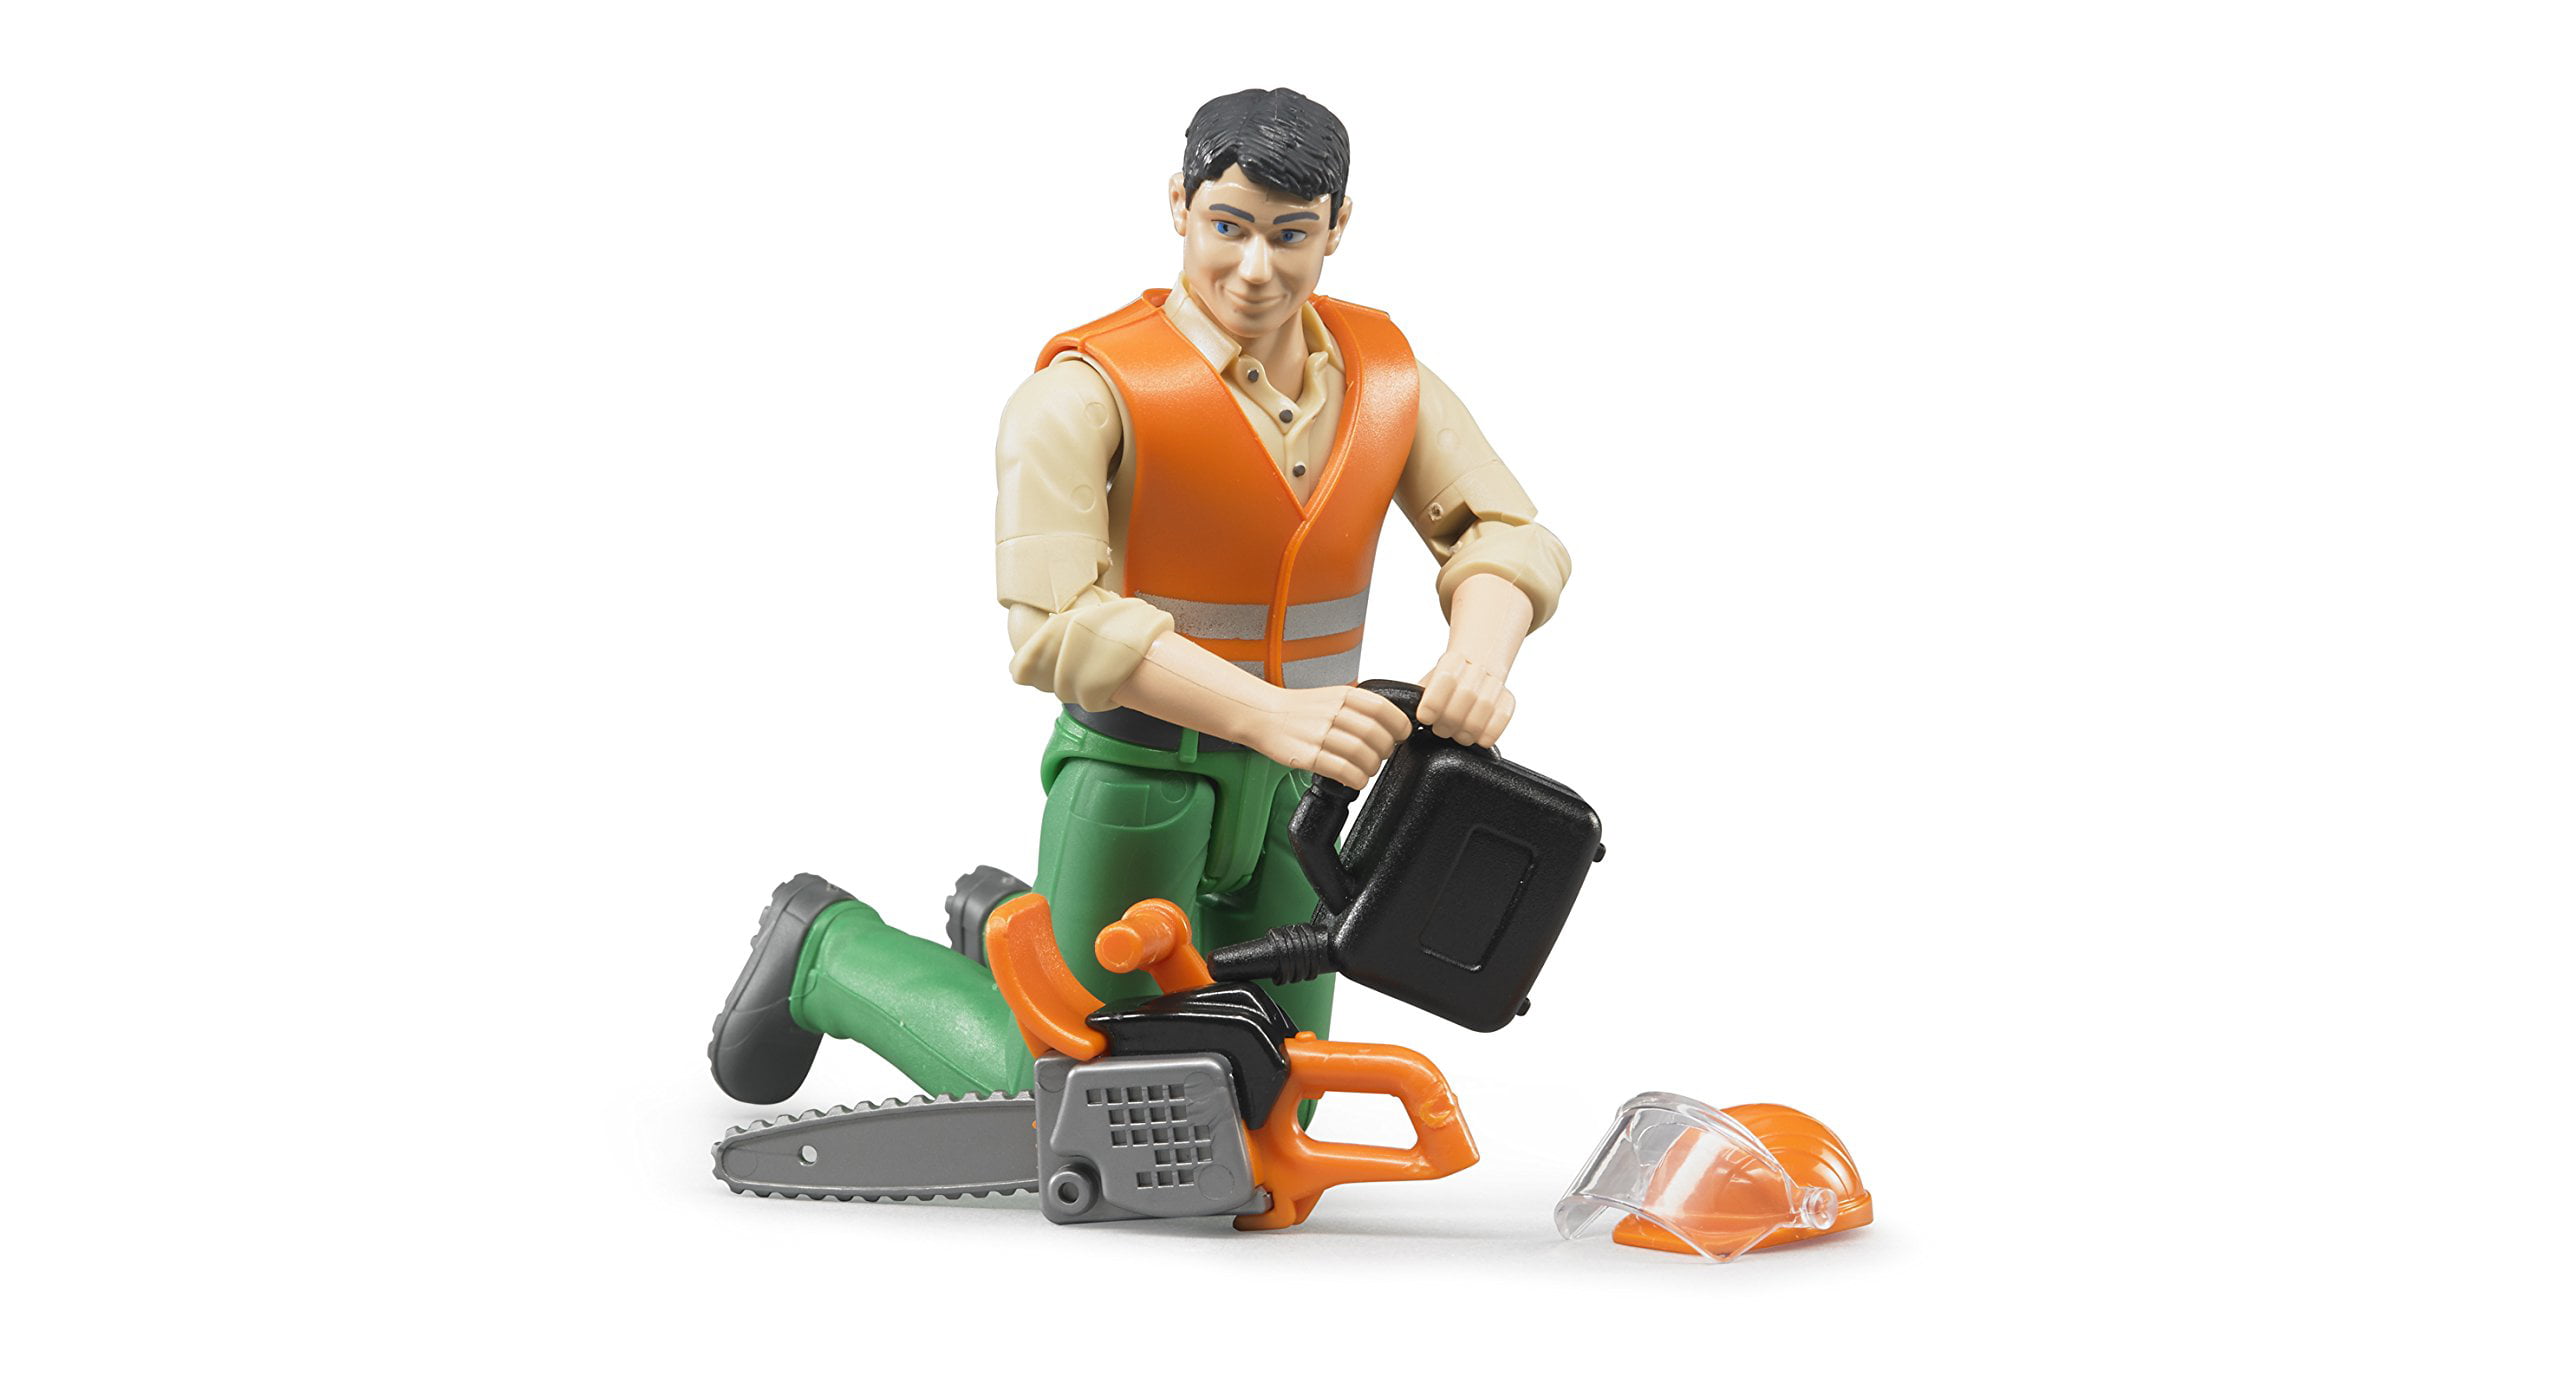 Forestry Worker with Accessories toy action figure Bruder 60030 Logging Man 